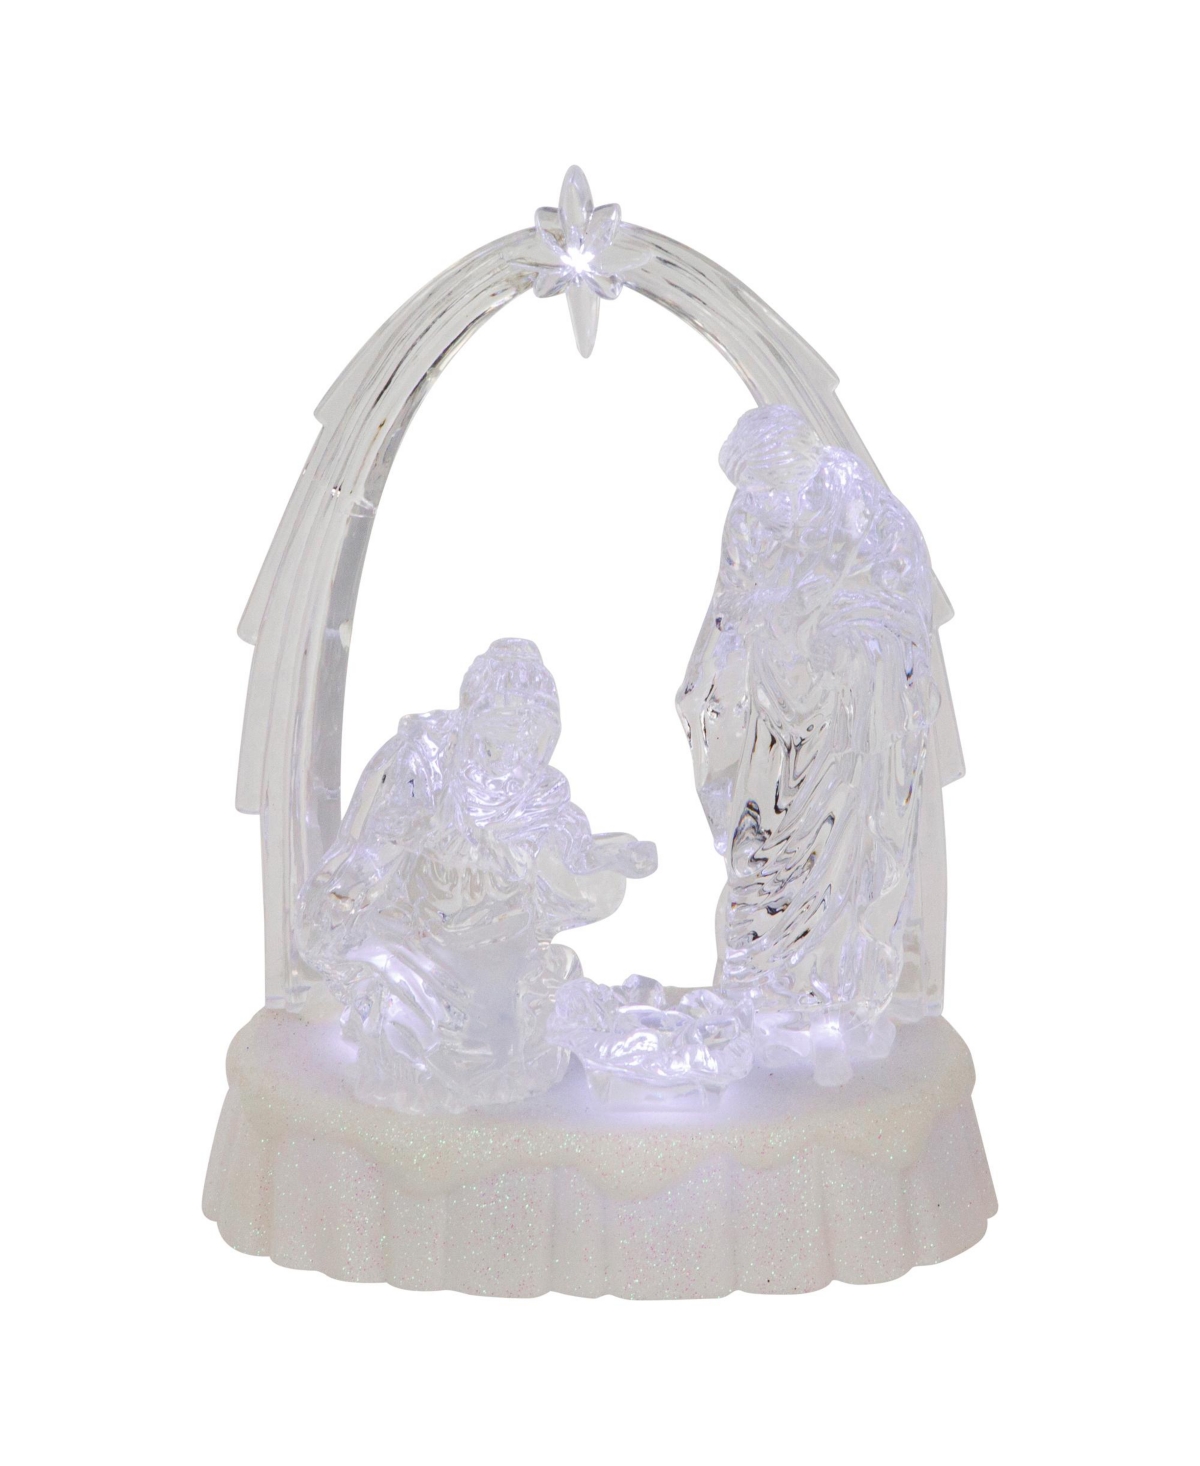 Northlight Led Lighted Musical Icy Crystal Nativity Scene Christmas Decoration, 7" In White